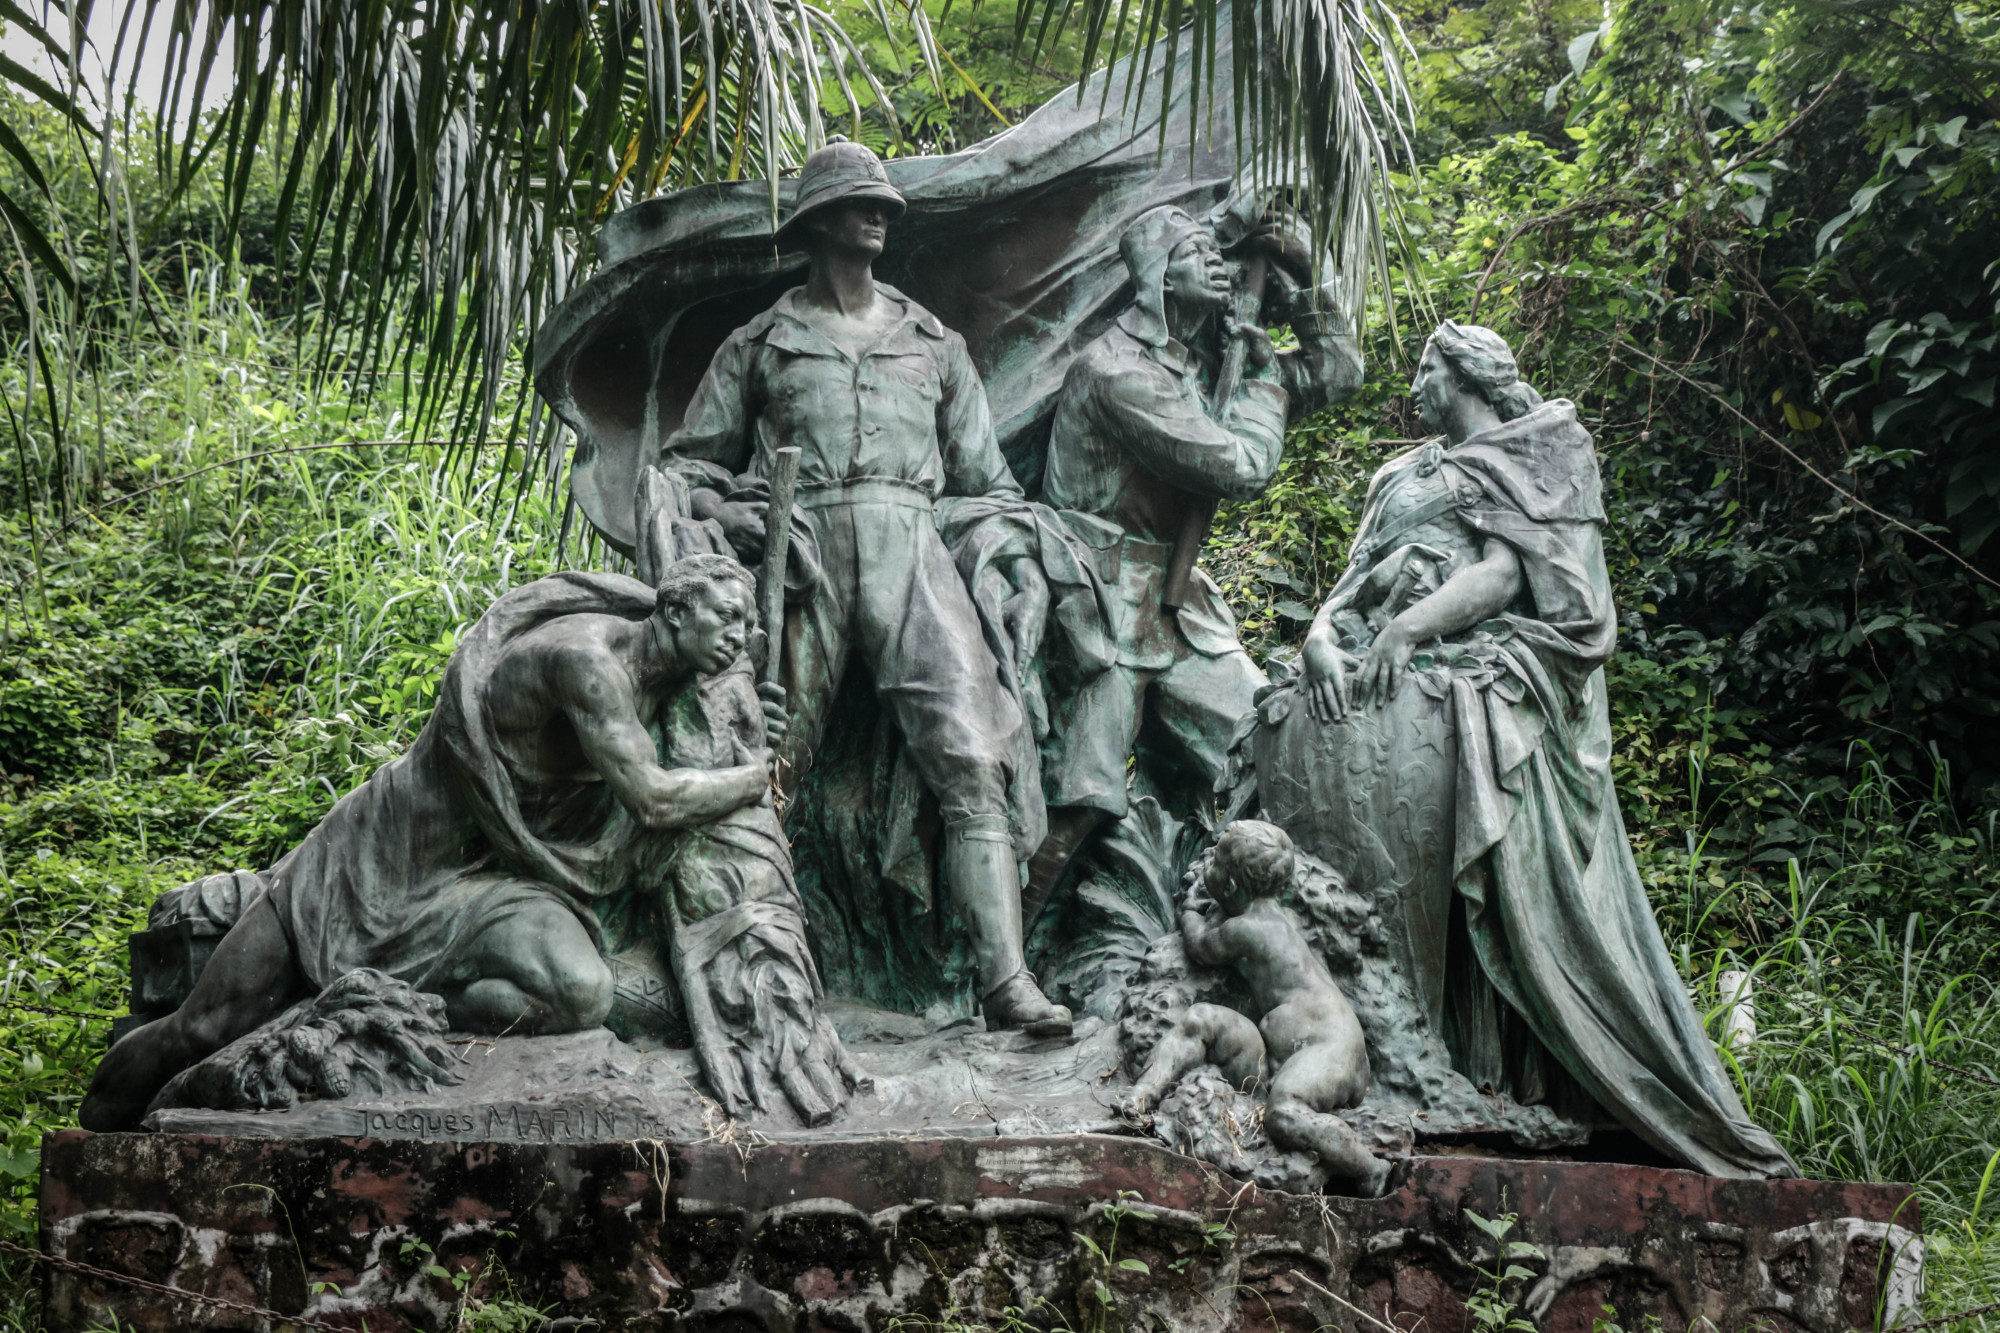 The Monument du Souvenir Congolais, a World War II memorial by Belgian sculptor Jacques Marin, depicts a Belgian Officer with a Congolese soldier and Congolese porter, at the Institute of National Museums of Congo, in the Mont Ngaliema area of the capital Kinshasa last week. Thousands of Congolese were drafted as part of the colonial armed forces, and fought during WWII in east Africa, the Middle East and Asia. Congolese soldiers, known as the Force Publique, were racially segregated and never received any compensation for their contributions to the war, according to a complaint filed in Congo in 2018 by seven children of ex-combatants. The case was in court late last year, but no judgment has been made. Kinshasa, DRC, June 2020 © Justin Makangara for Fondation Carmignac